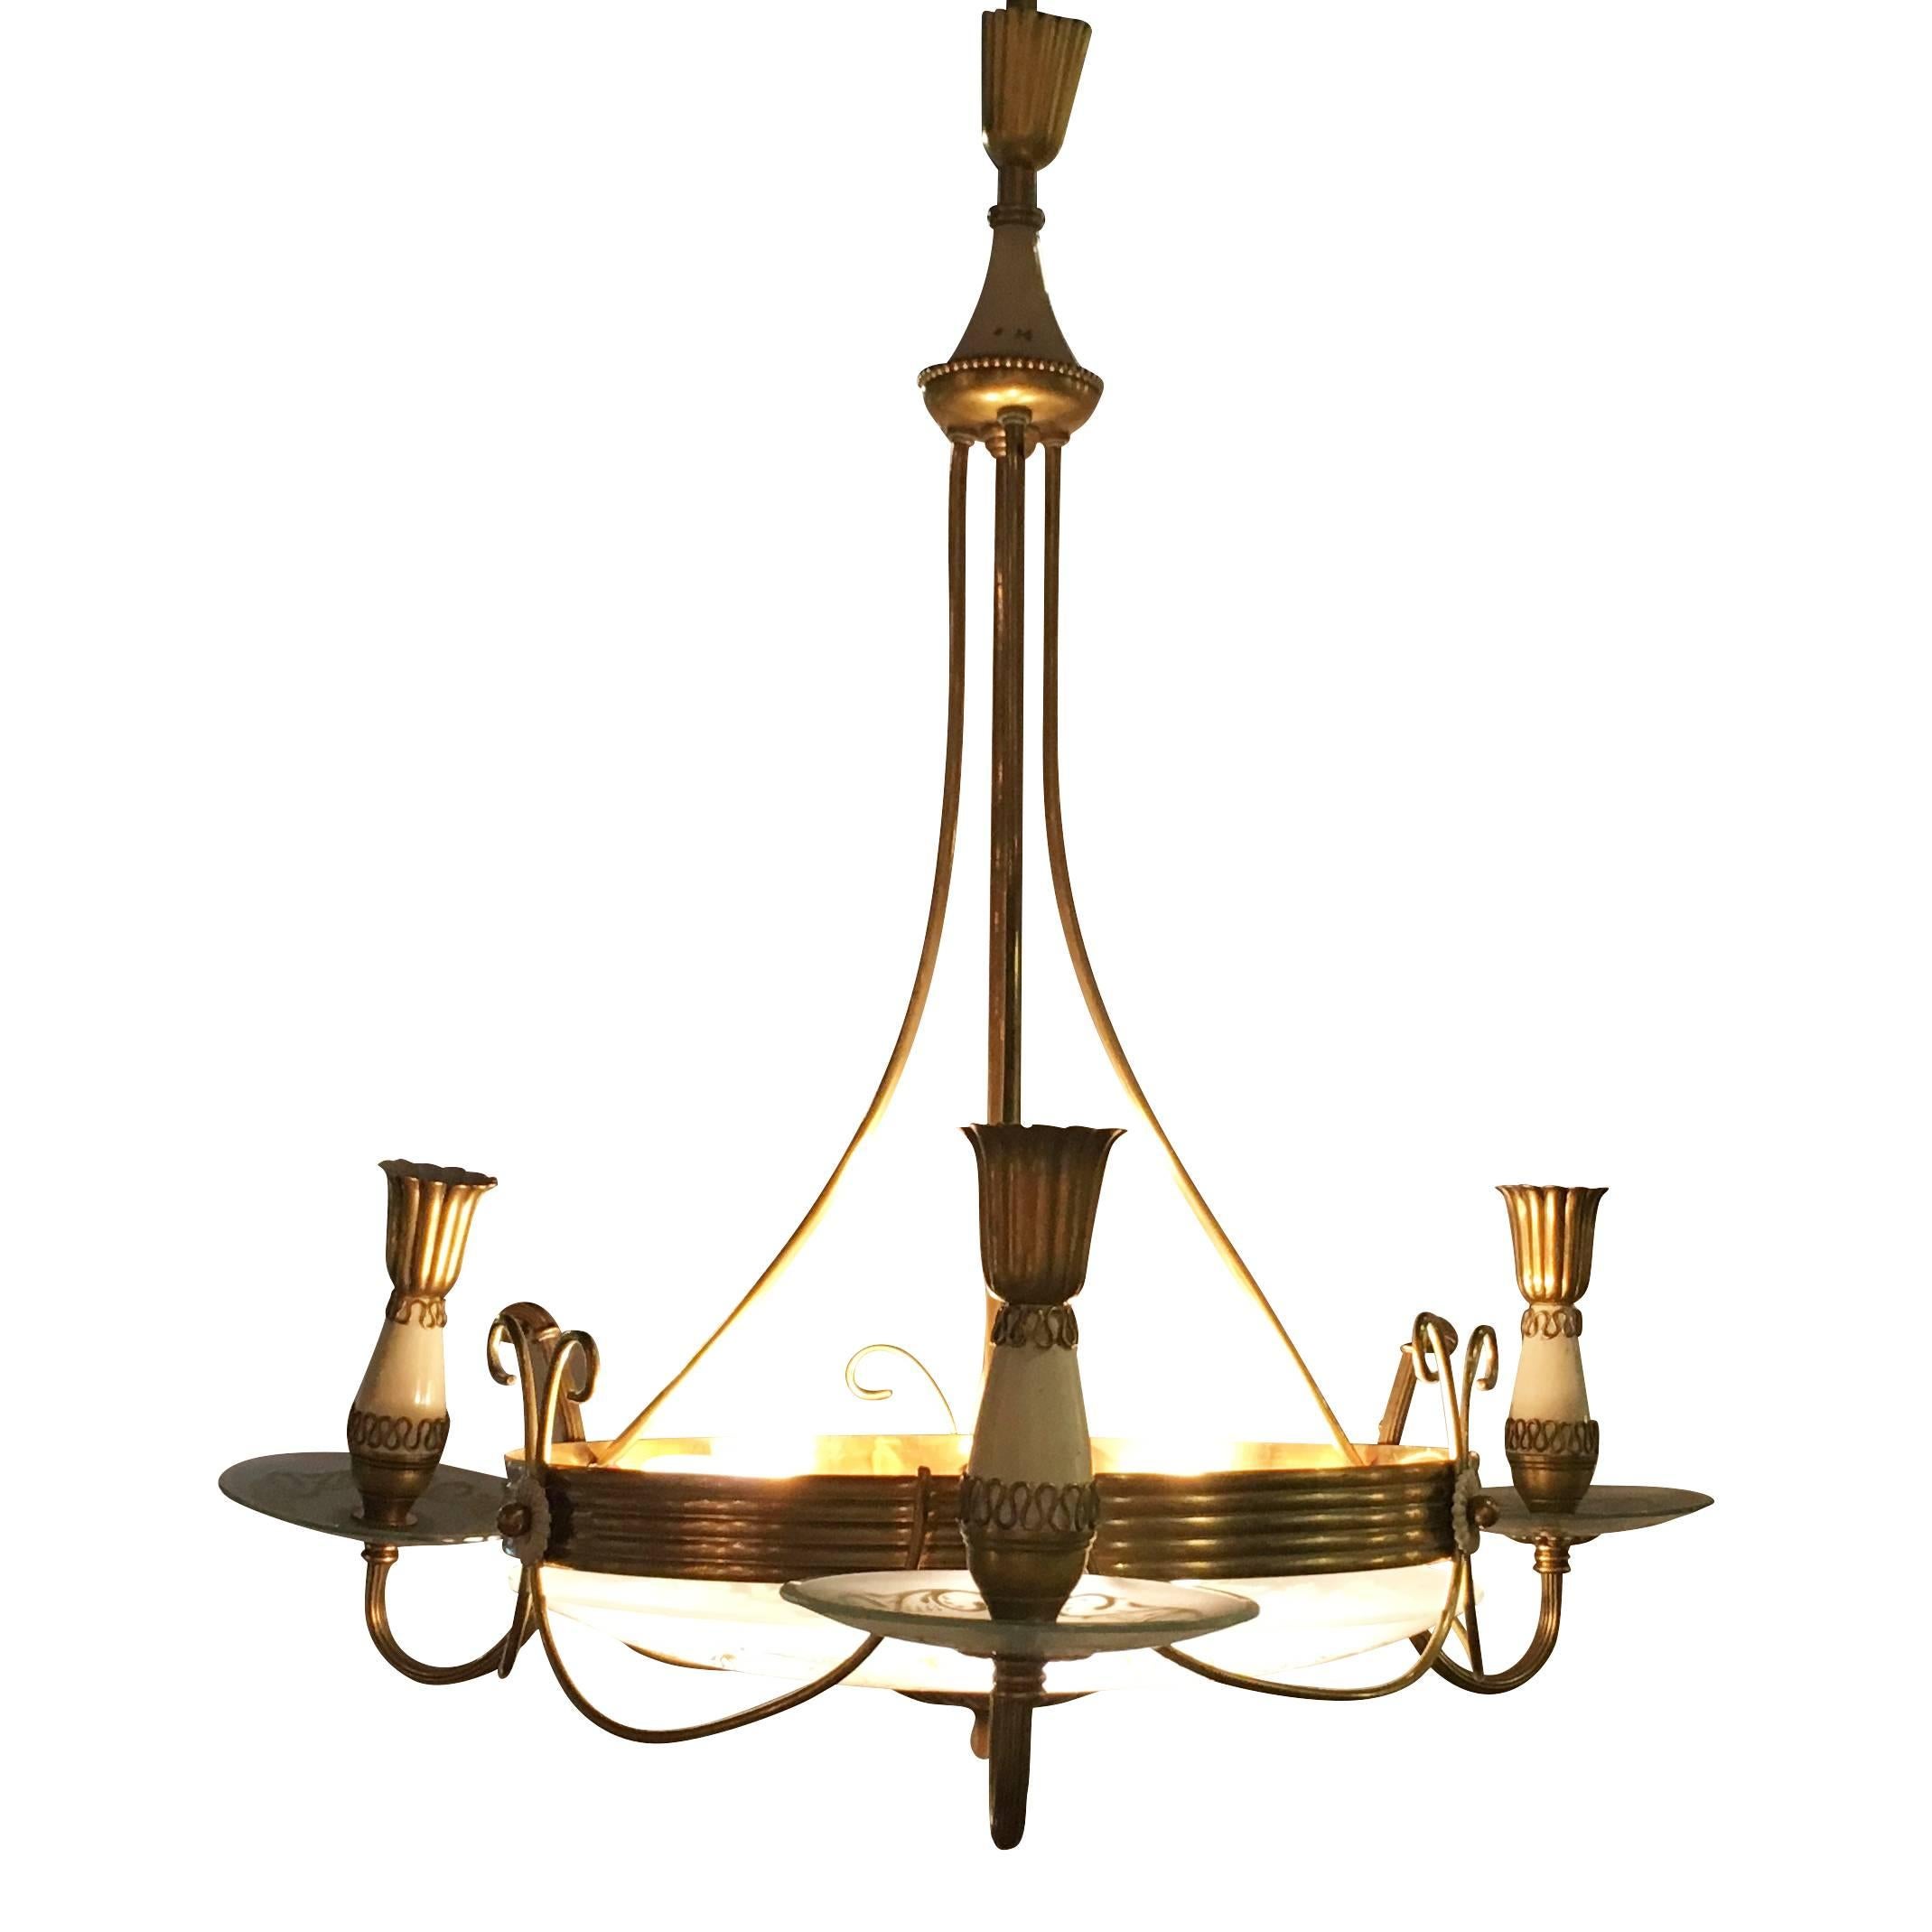 A round Mid-Century Modern Italian ceiling chandelier, designed by Pietro Chiesa and produced by Fontana Arte in good condition. Structure made of hand crafted brass and crystal glass with replaced wiring. Wear consistent with age and use. Circa